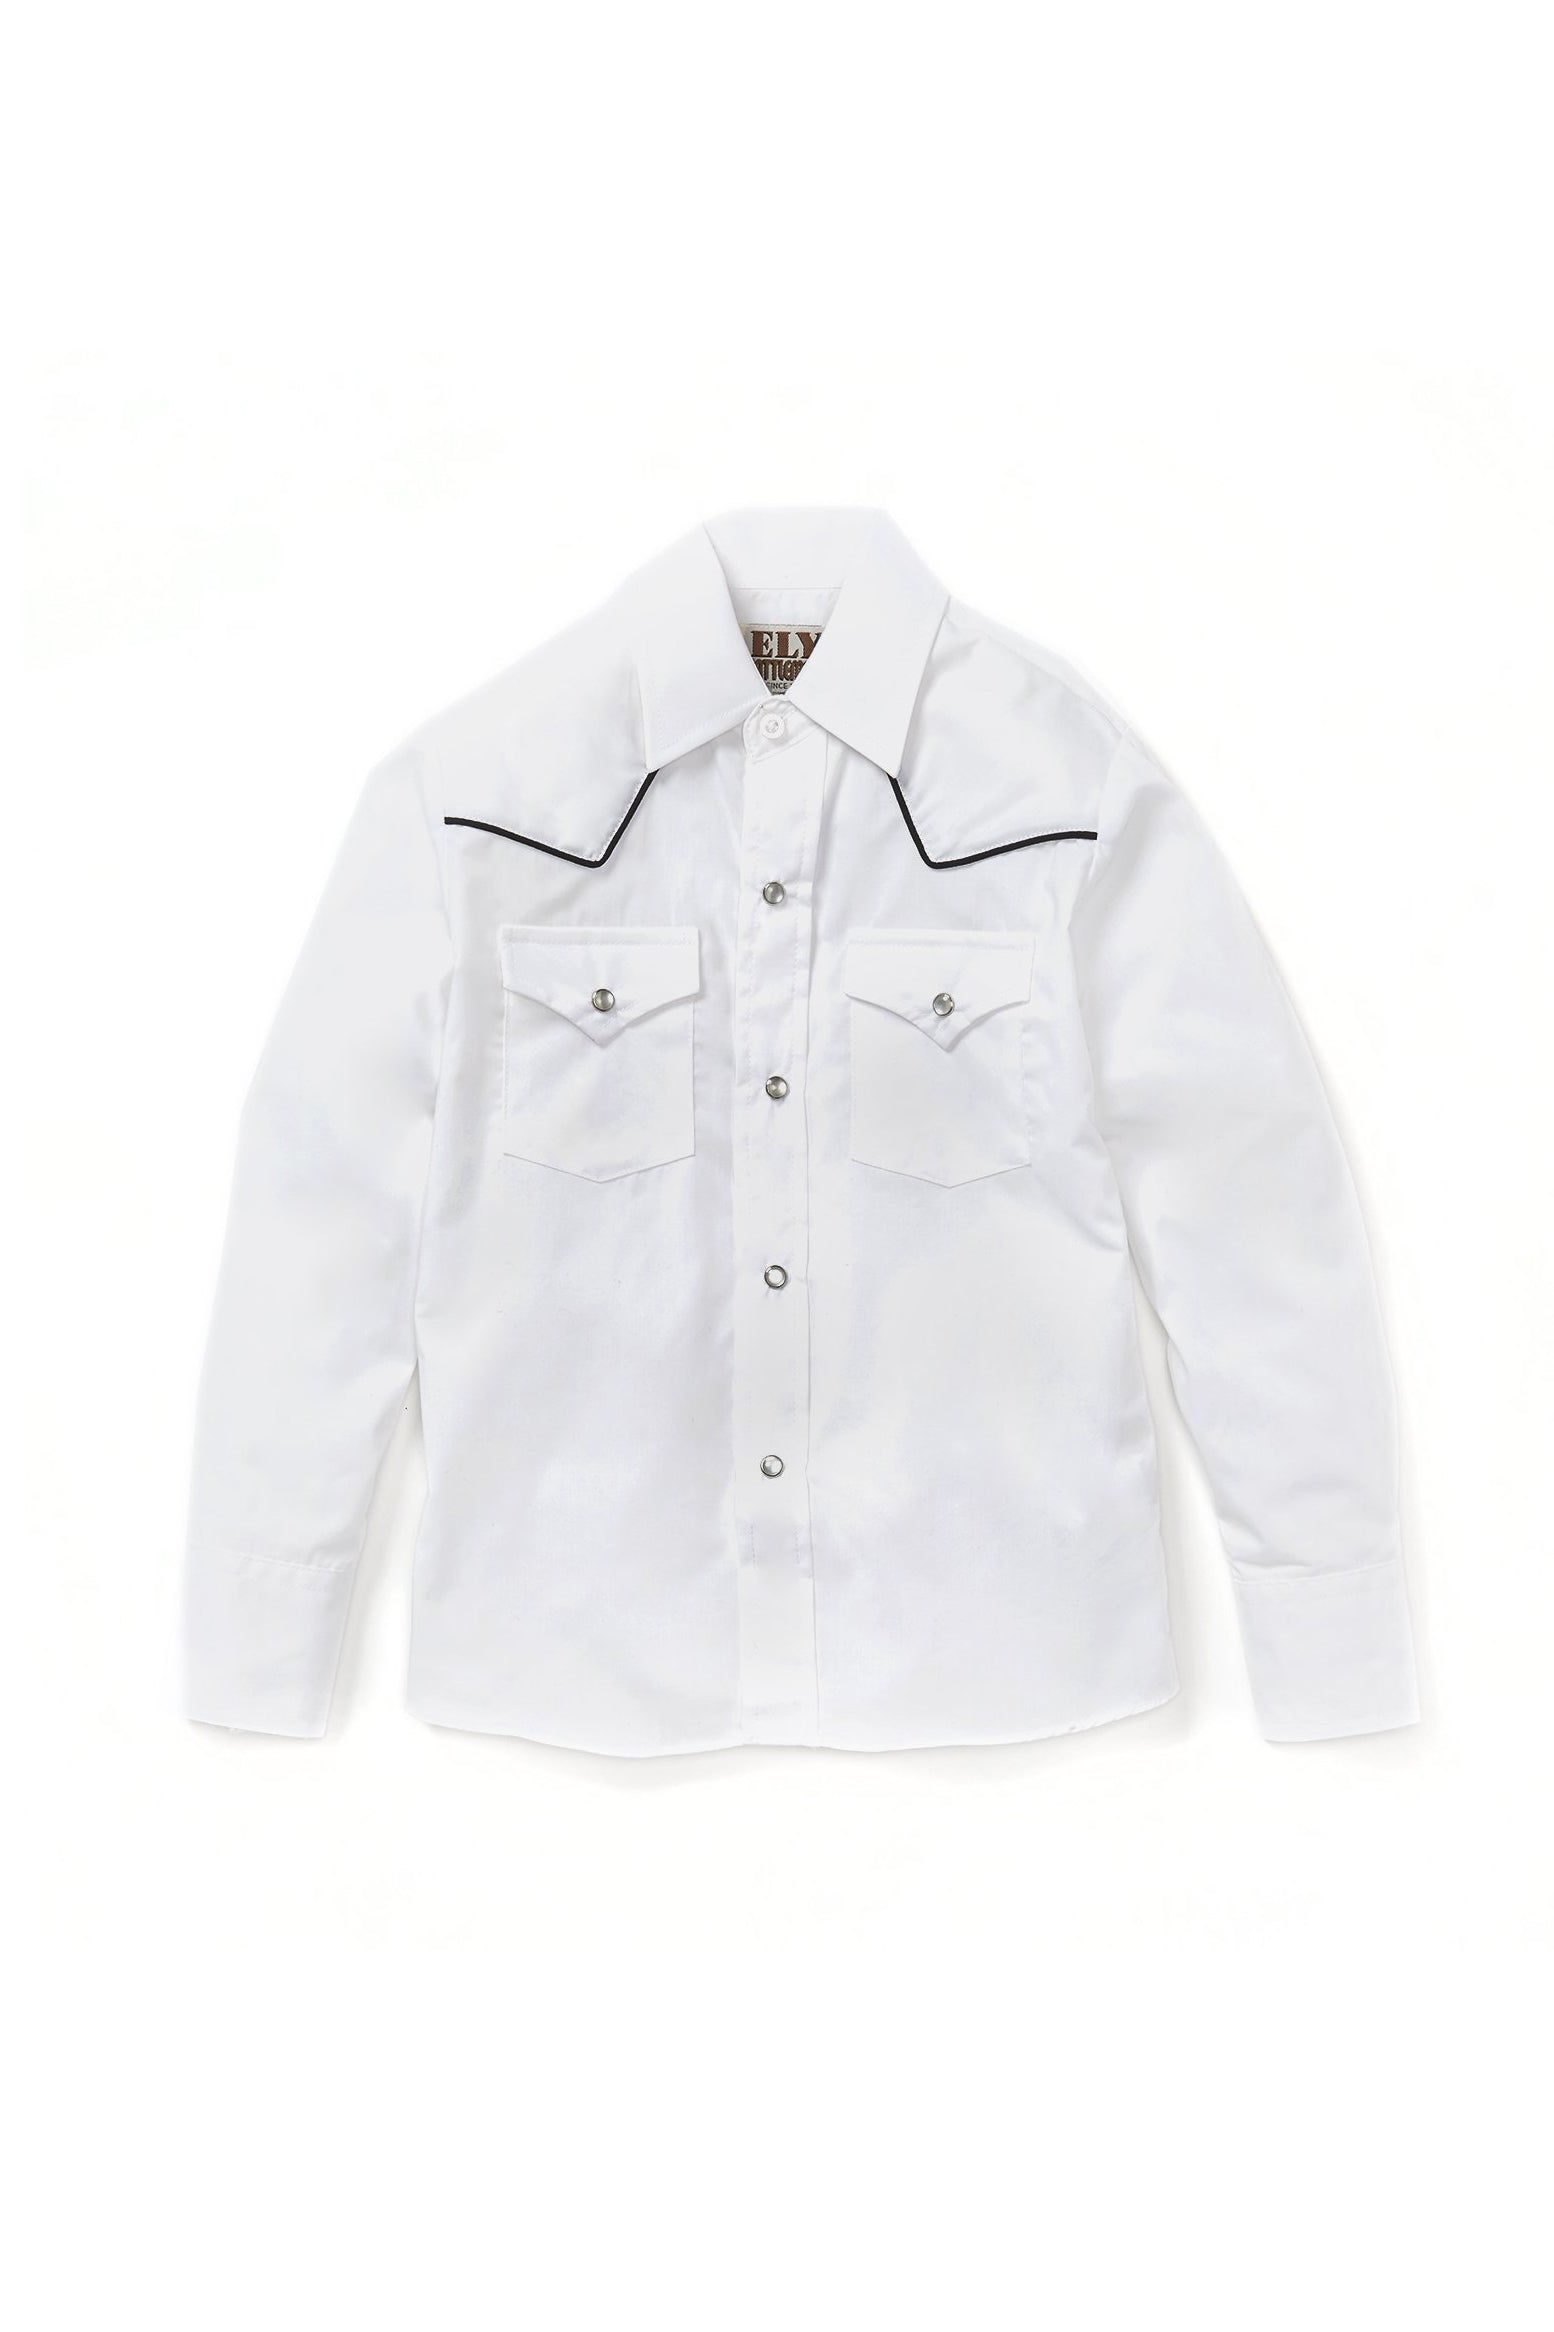 Boy's Long Sleeve Solid Western Shirt with Black Piping | Ely Cattleman